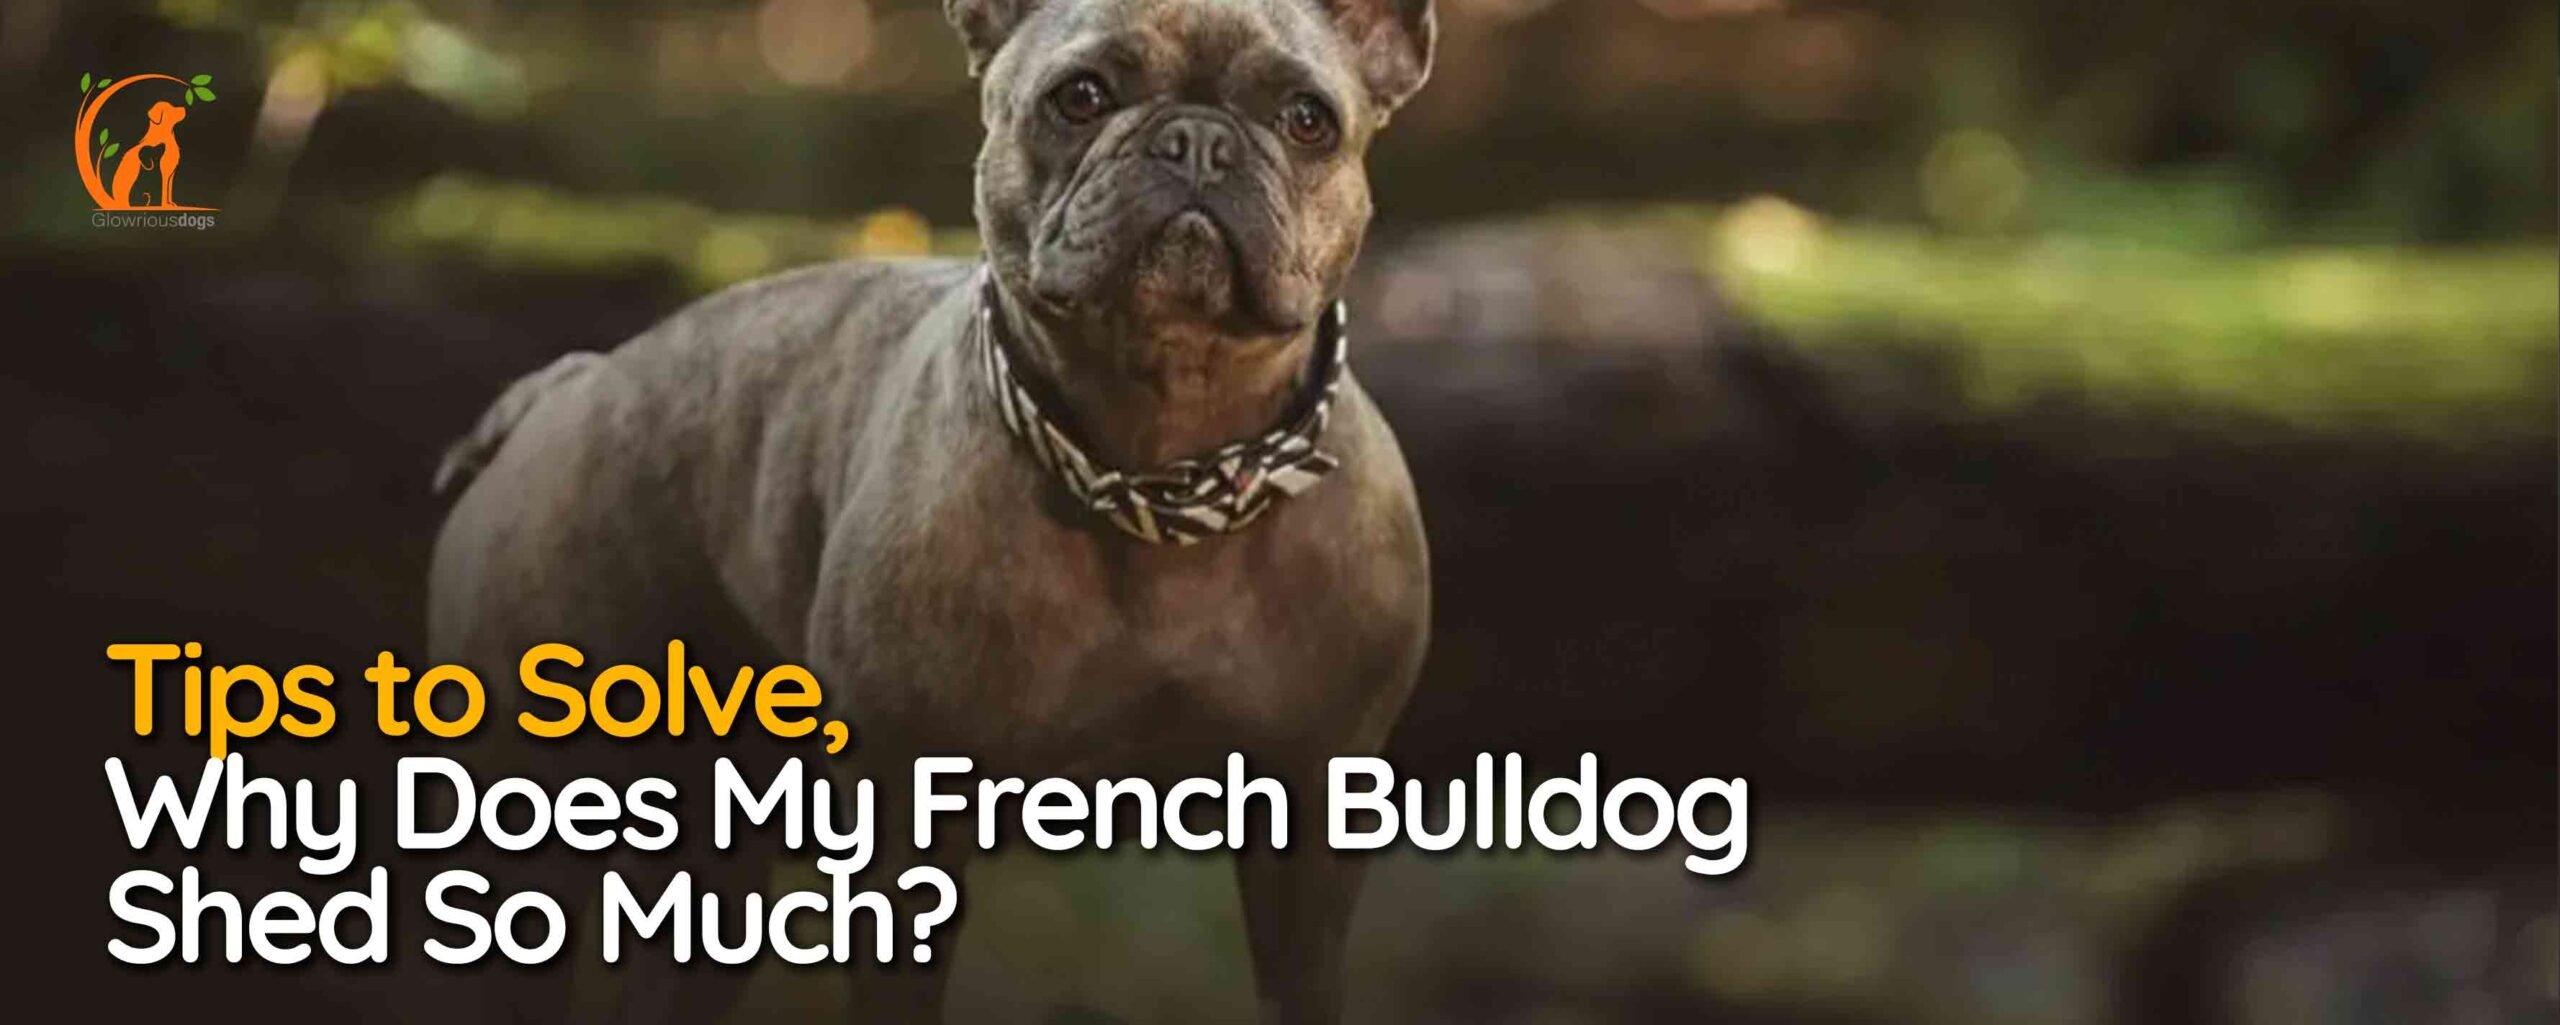 Why Does My French Bulldog Shed So Much